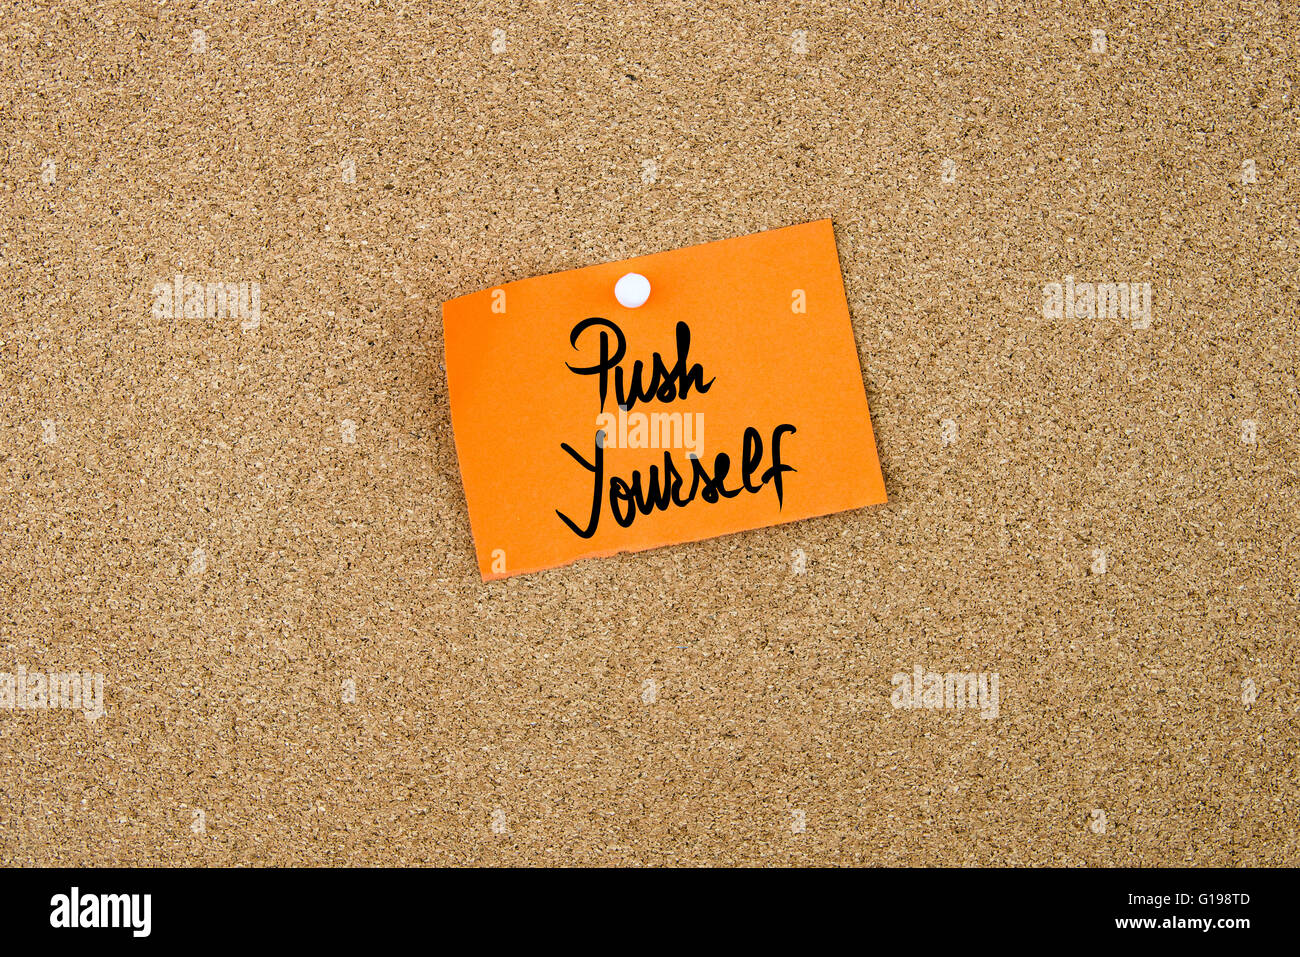 Push Yourself written on orange paper note pinned on cork board with white thumbtacks, copy space available Stock Photo